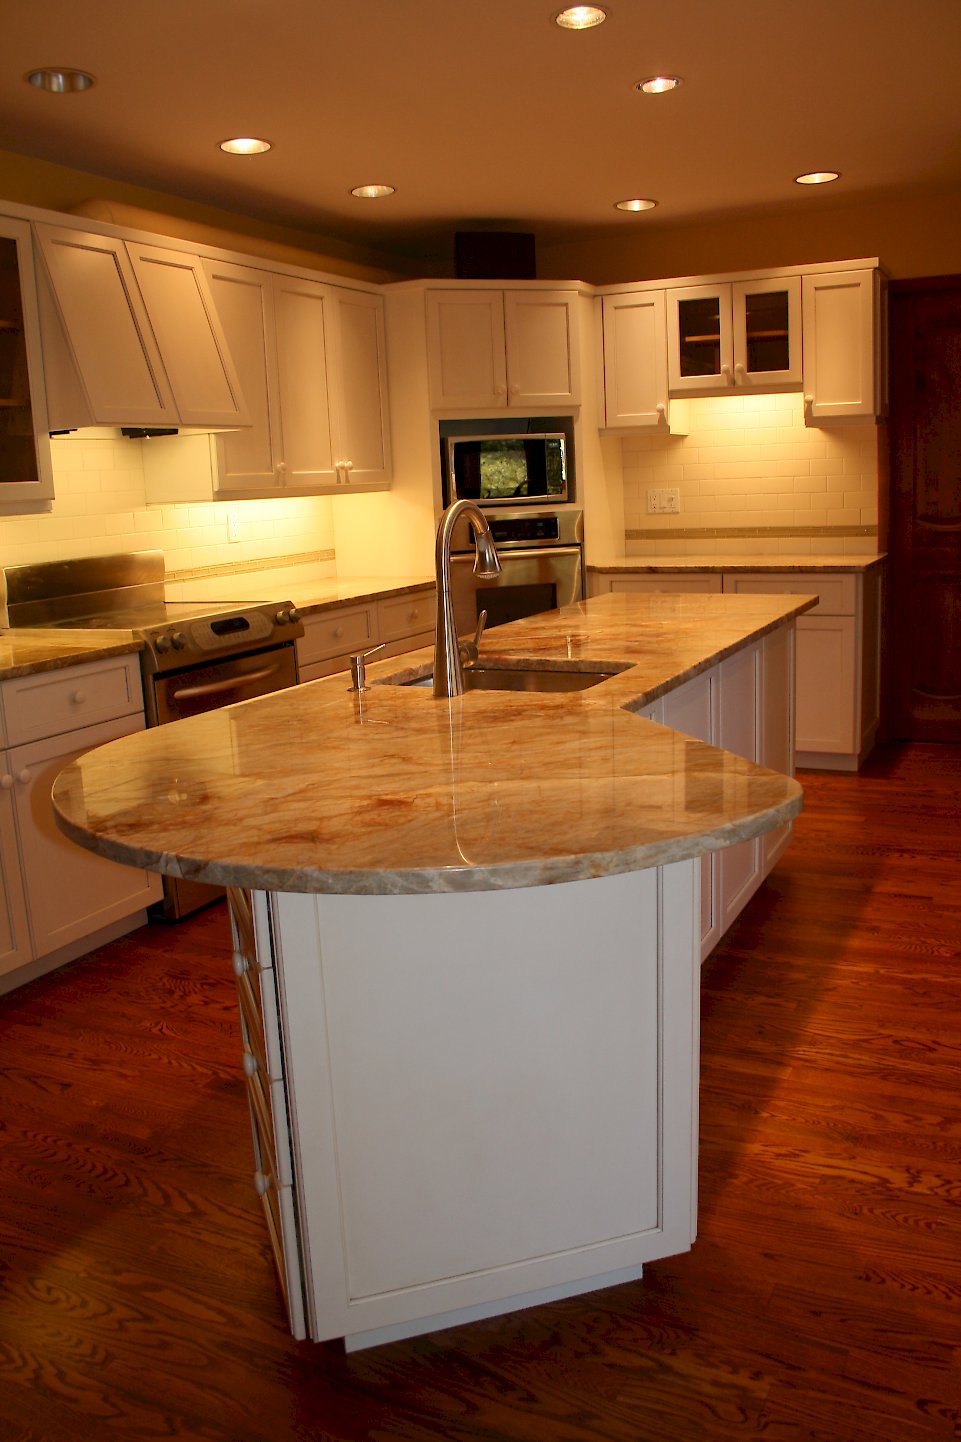 Rounded counter-top at the end of the island.